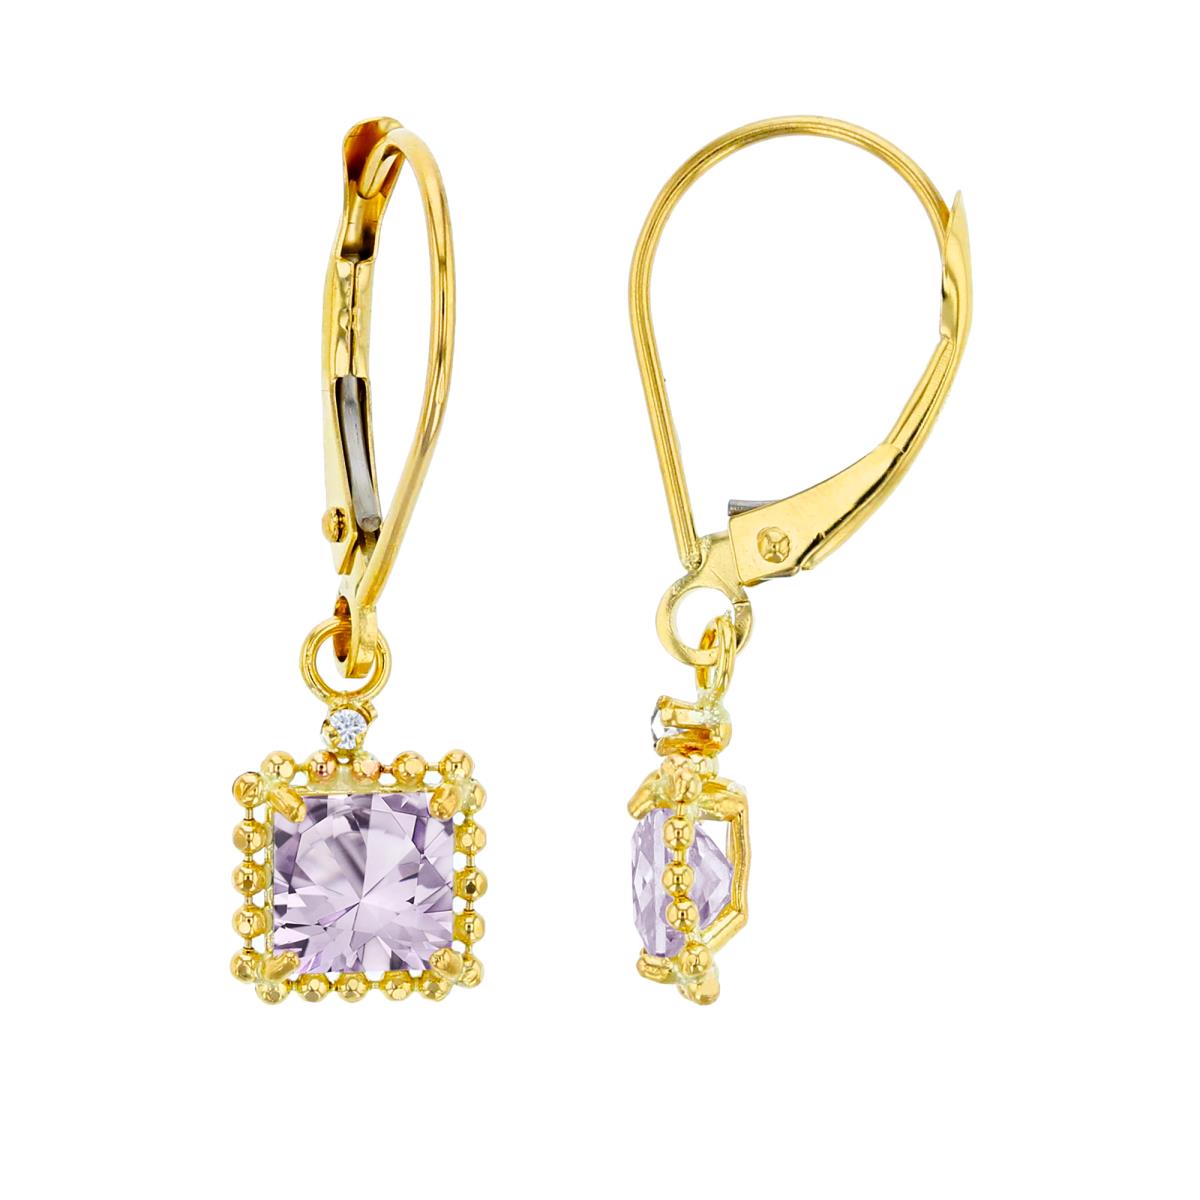 14K Yellow Gold 1.25mm Rd Created White Sapphire & 5mm Sq Rose De France Bead Frame Drop Lever-Back Earring